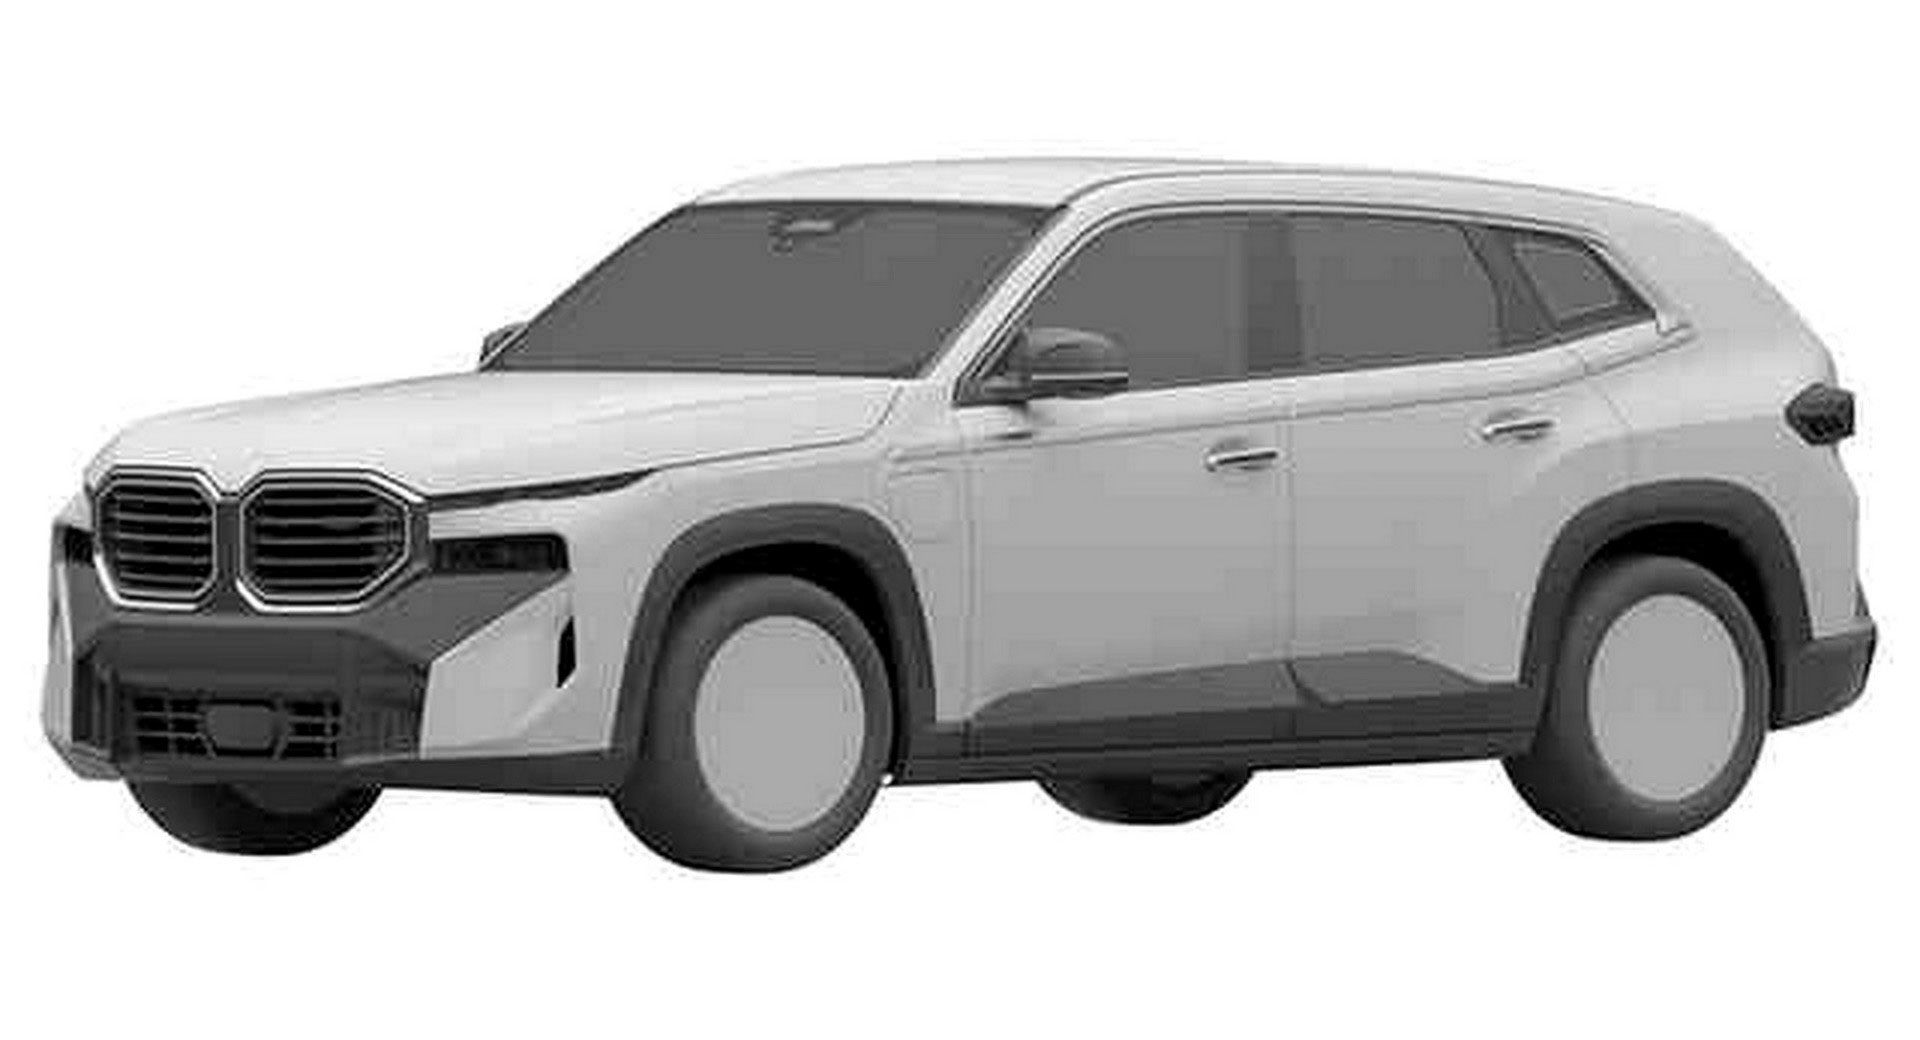 Production 2023 Bmw Xm Revealed In New Patent Photos With Subtle Design